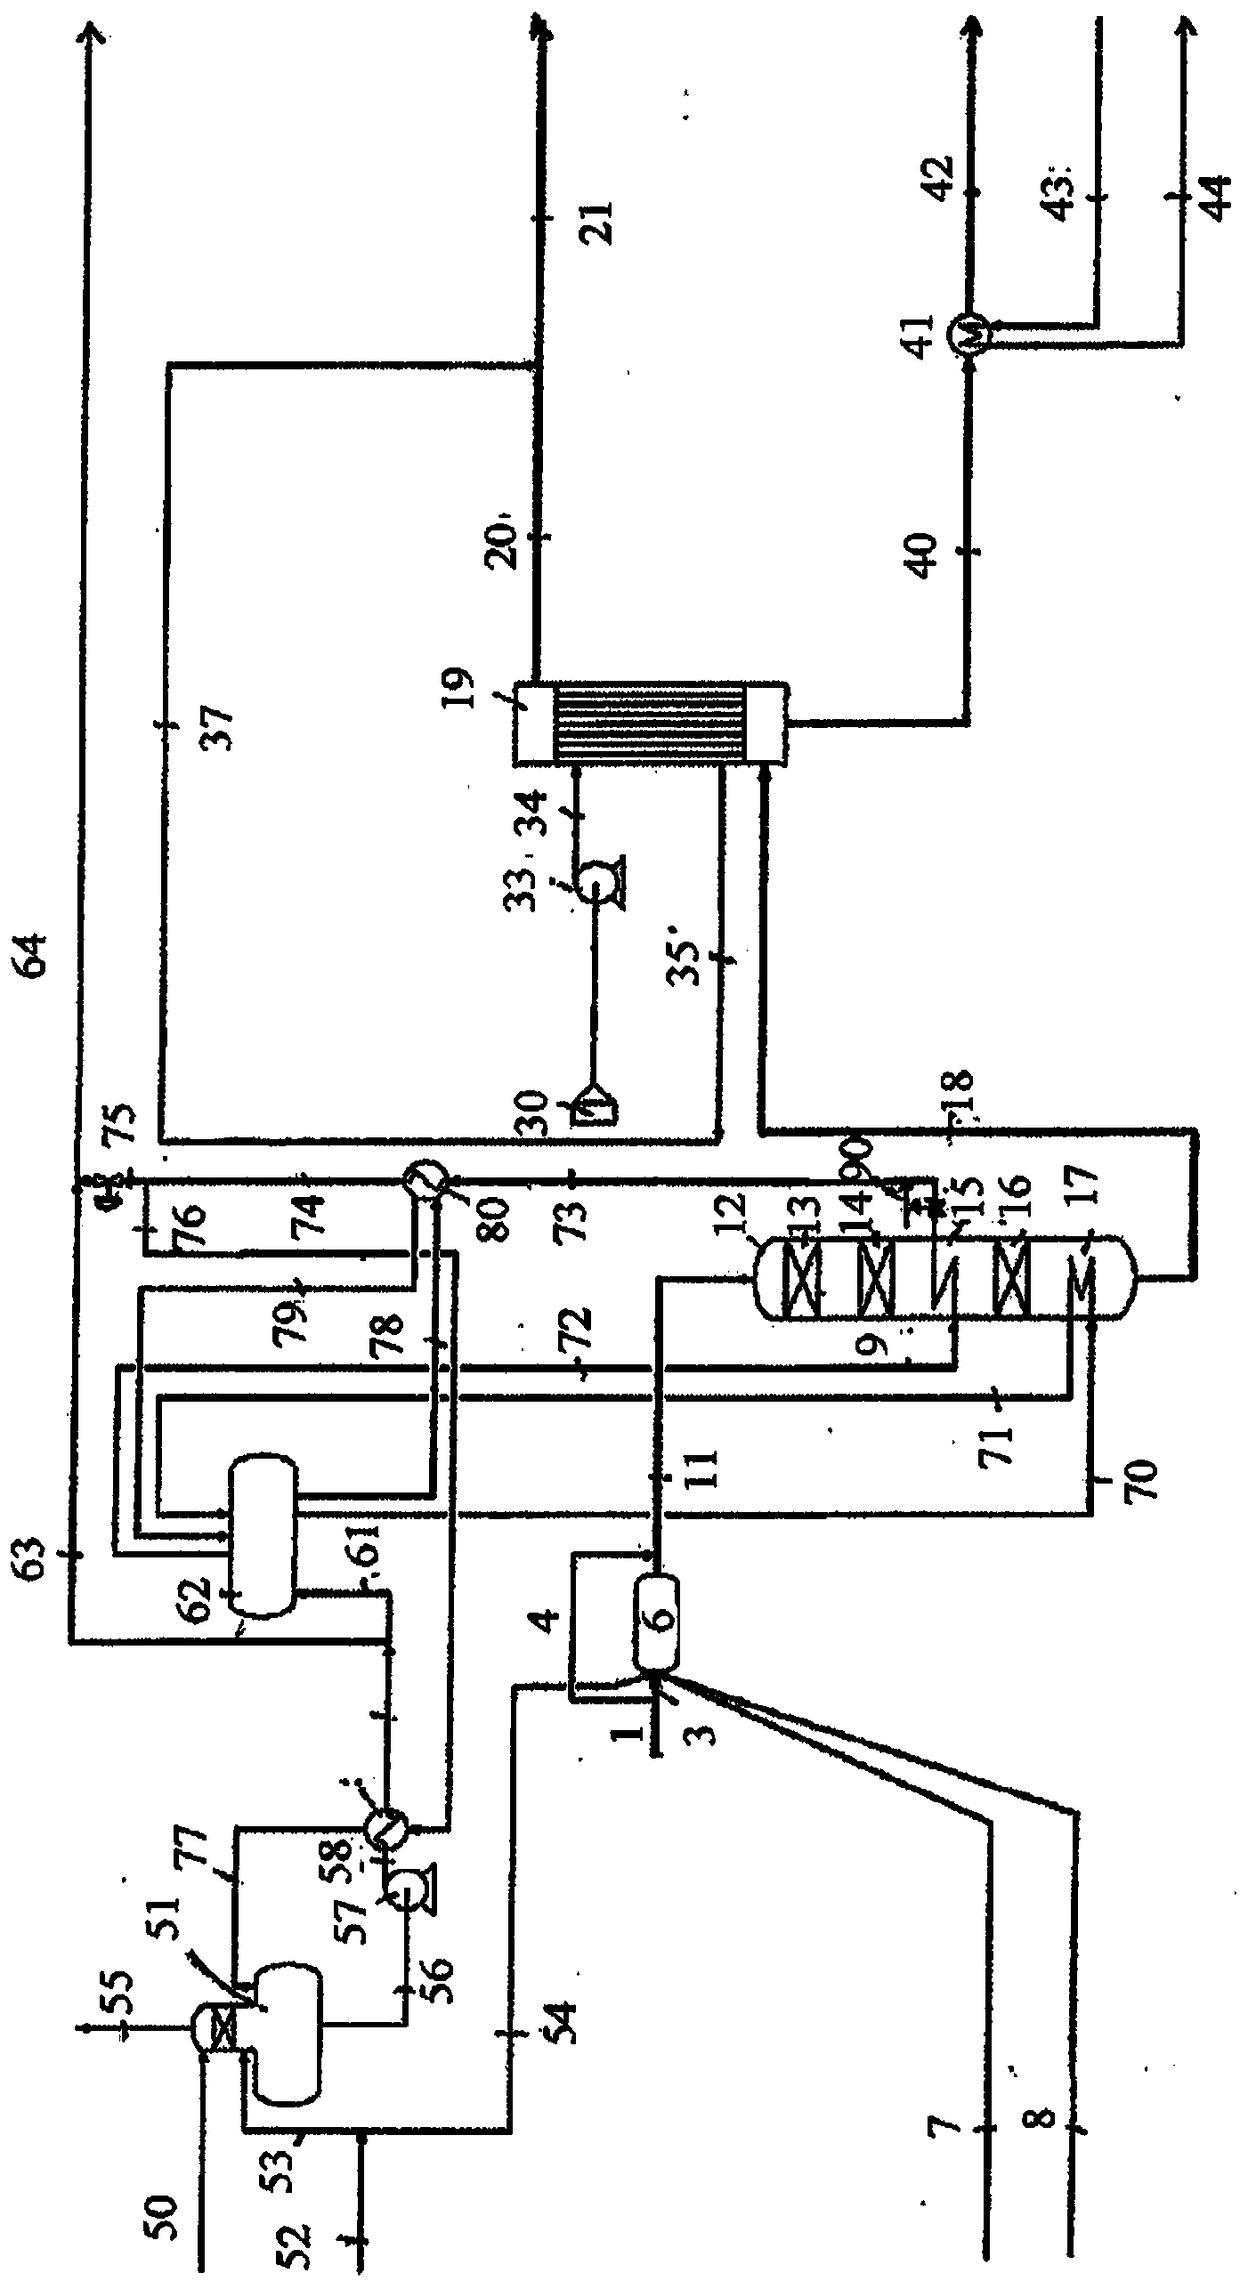 A method for inter-bed cooling in wet gas sulfuric acid plants